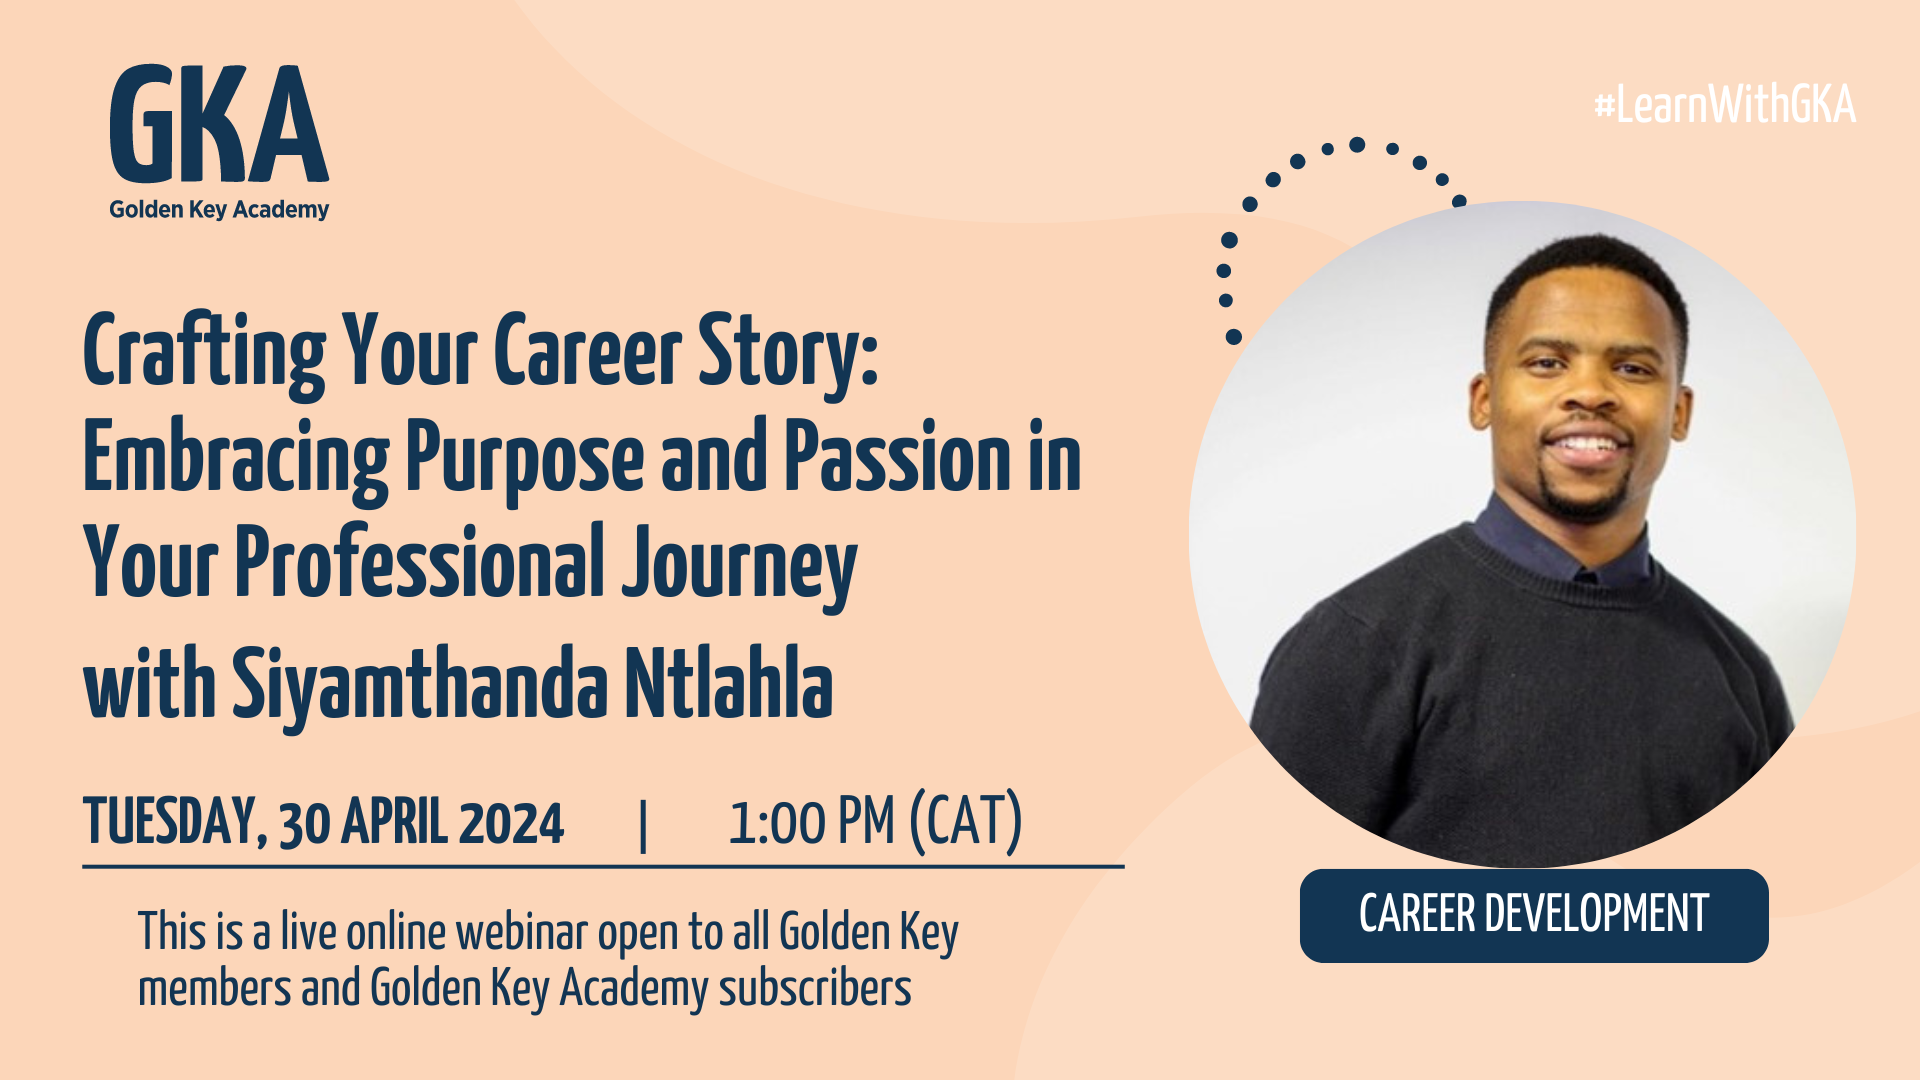 Crafting Your Career Story: Embracing Purpose and Passion in Your Professional Journey with Siyamthanda Ntlahla